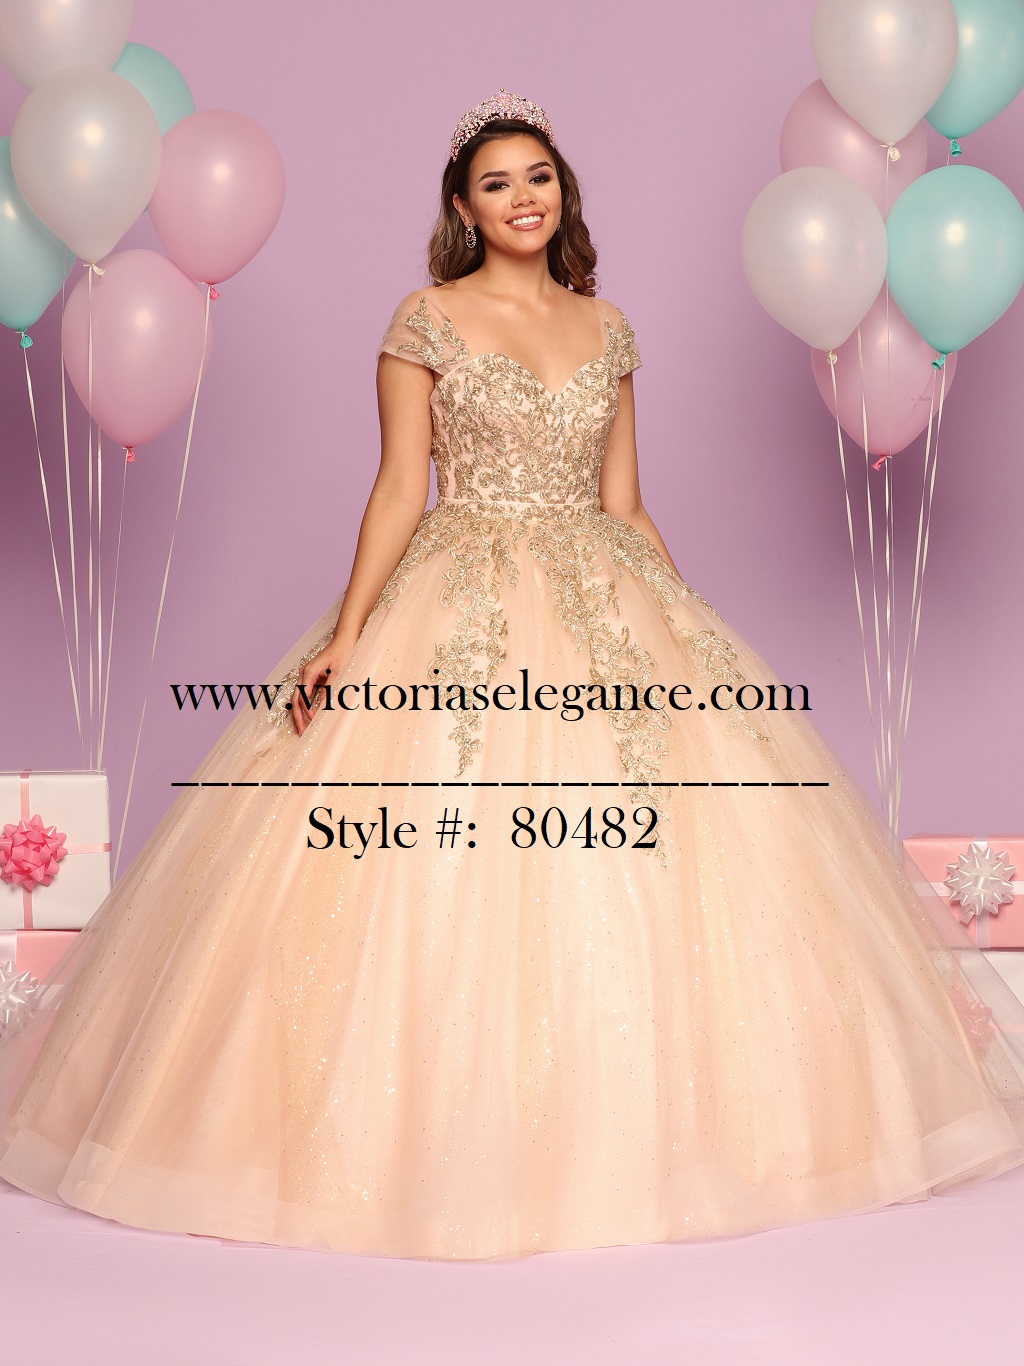 DaVinci Two-Piece Tulle Ball Gown